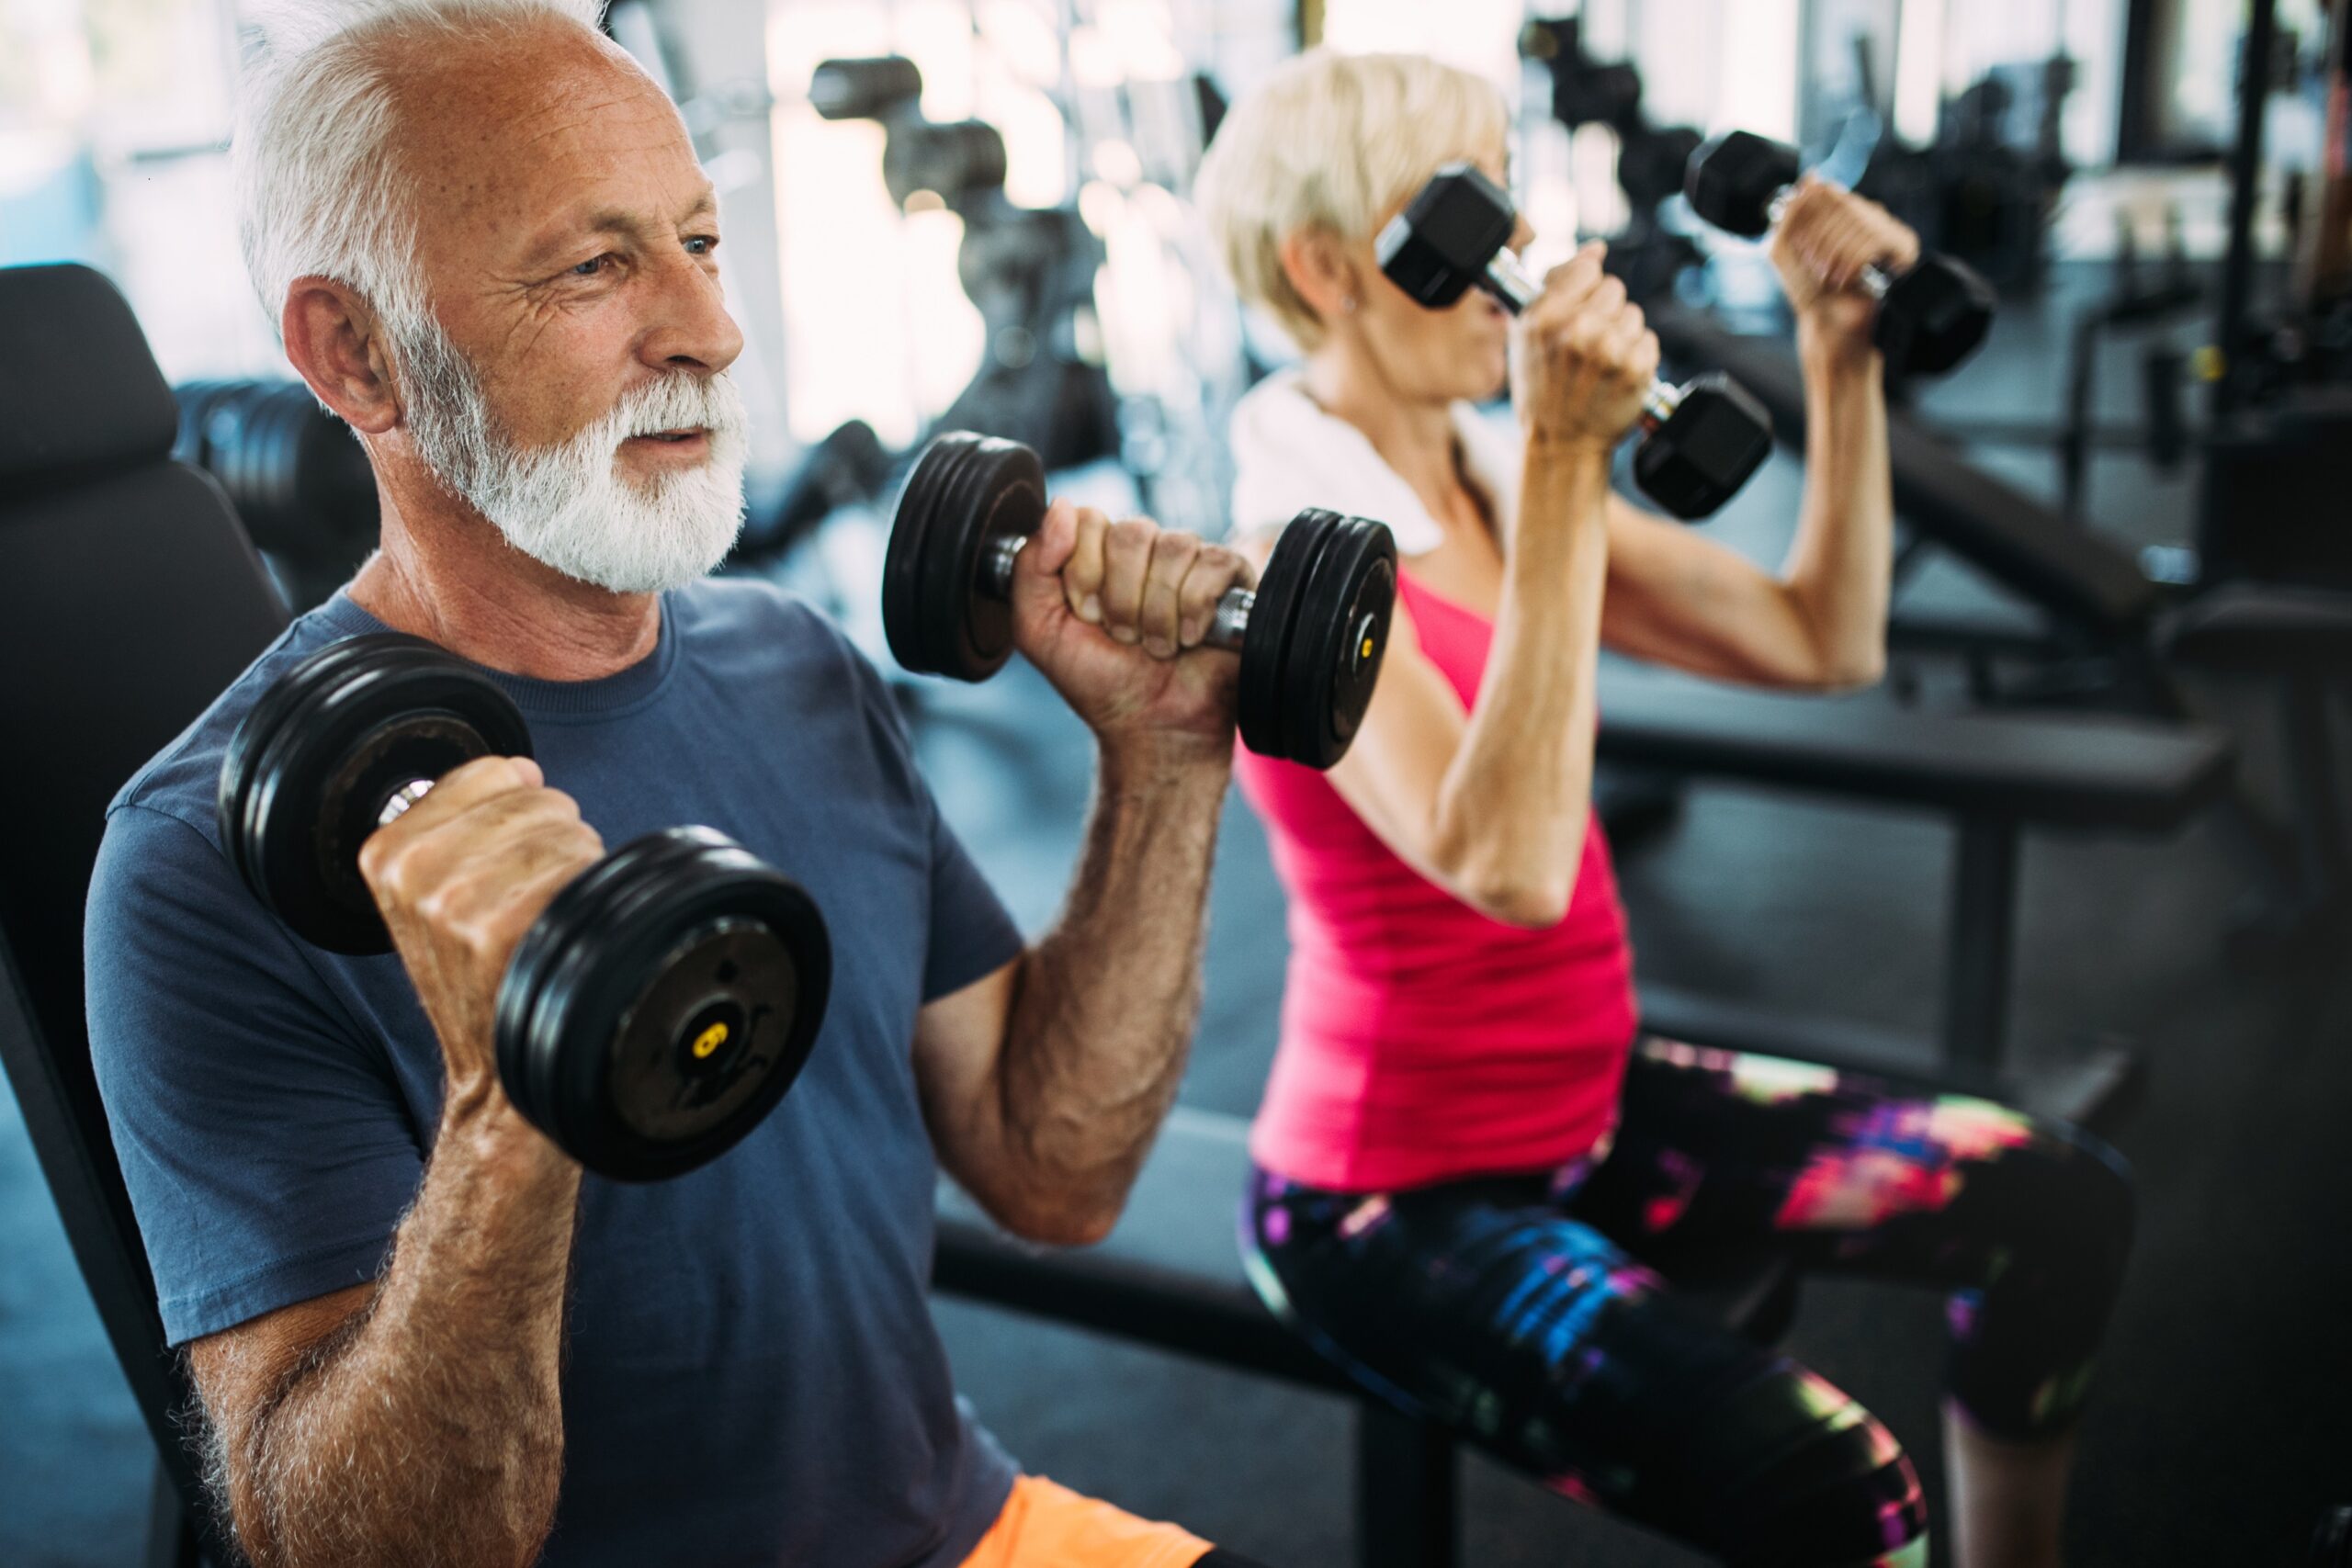 Strength training protects against anxiety and depression in old age